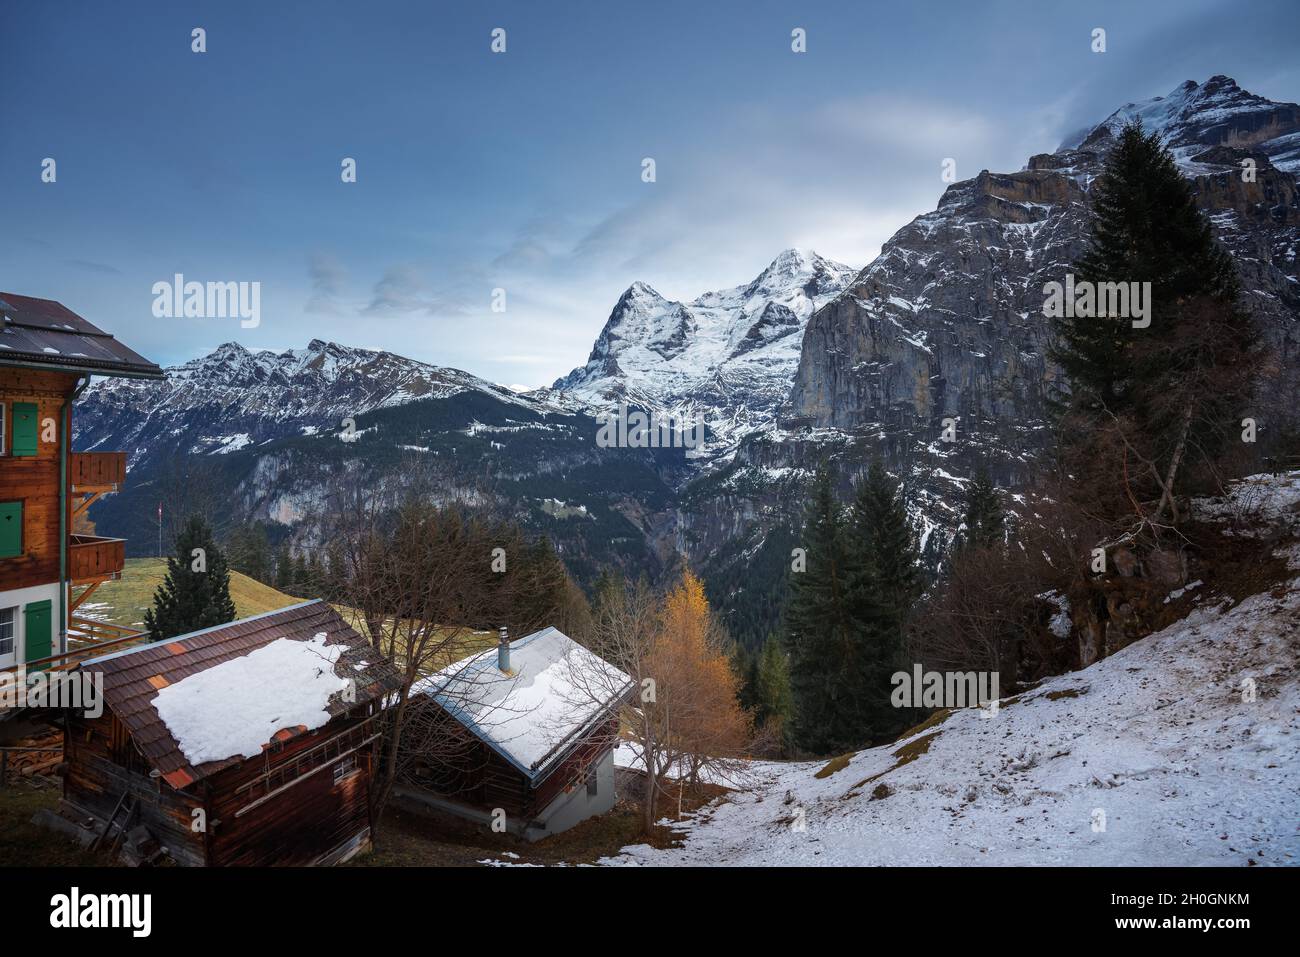 Murren Village with a view of Eiger and Monch Mountains - Murren, Switzerland Stock Photo